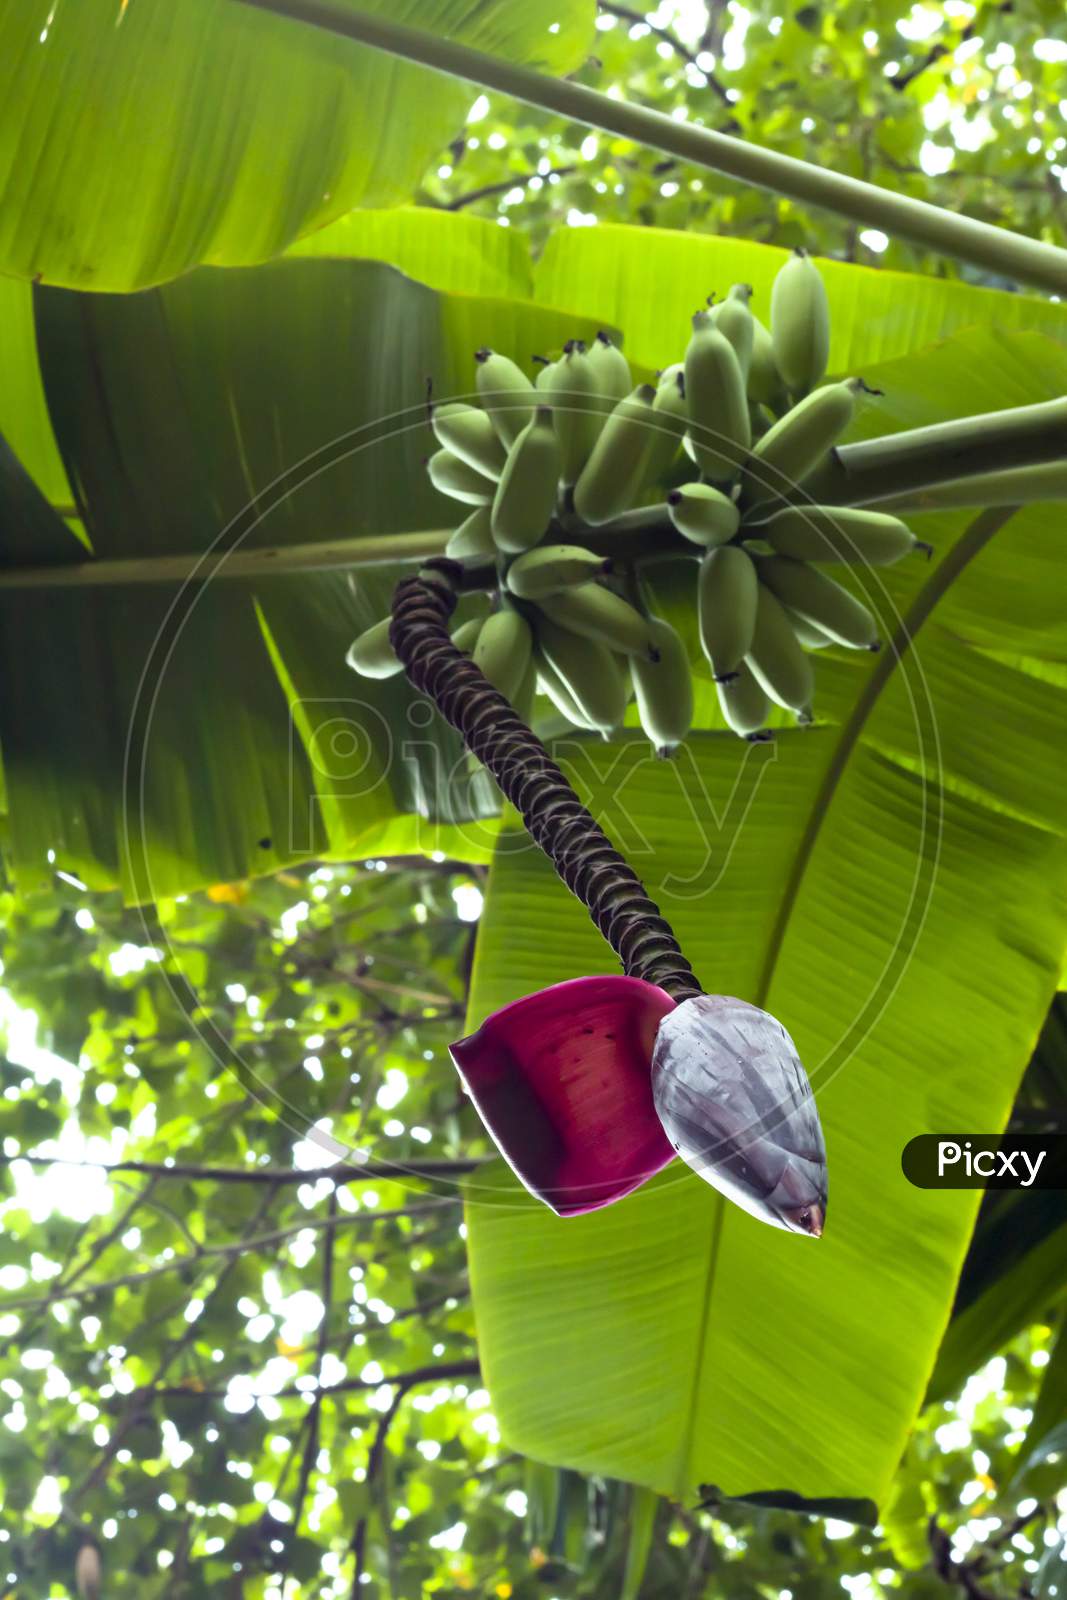 Bunch of green bananas with banana flower on a tree.